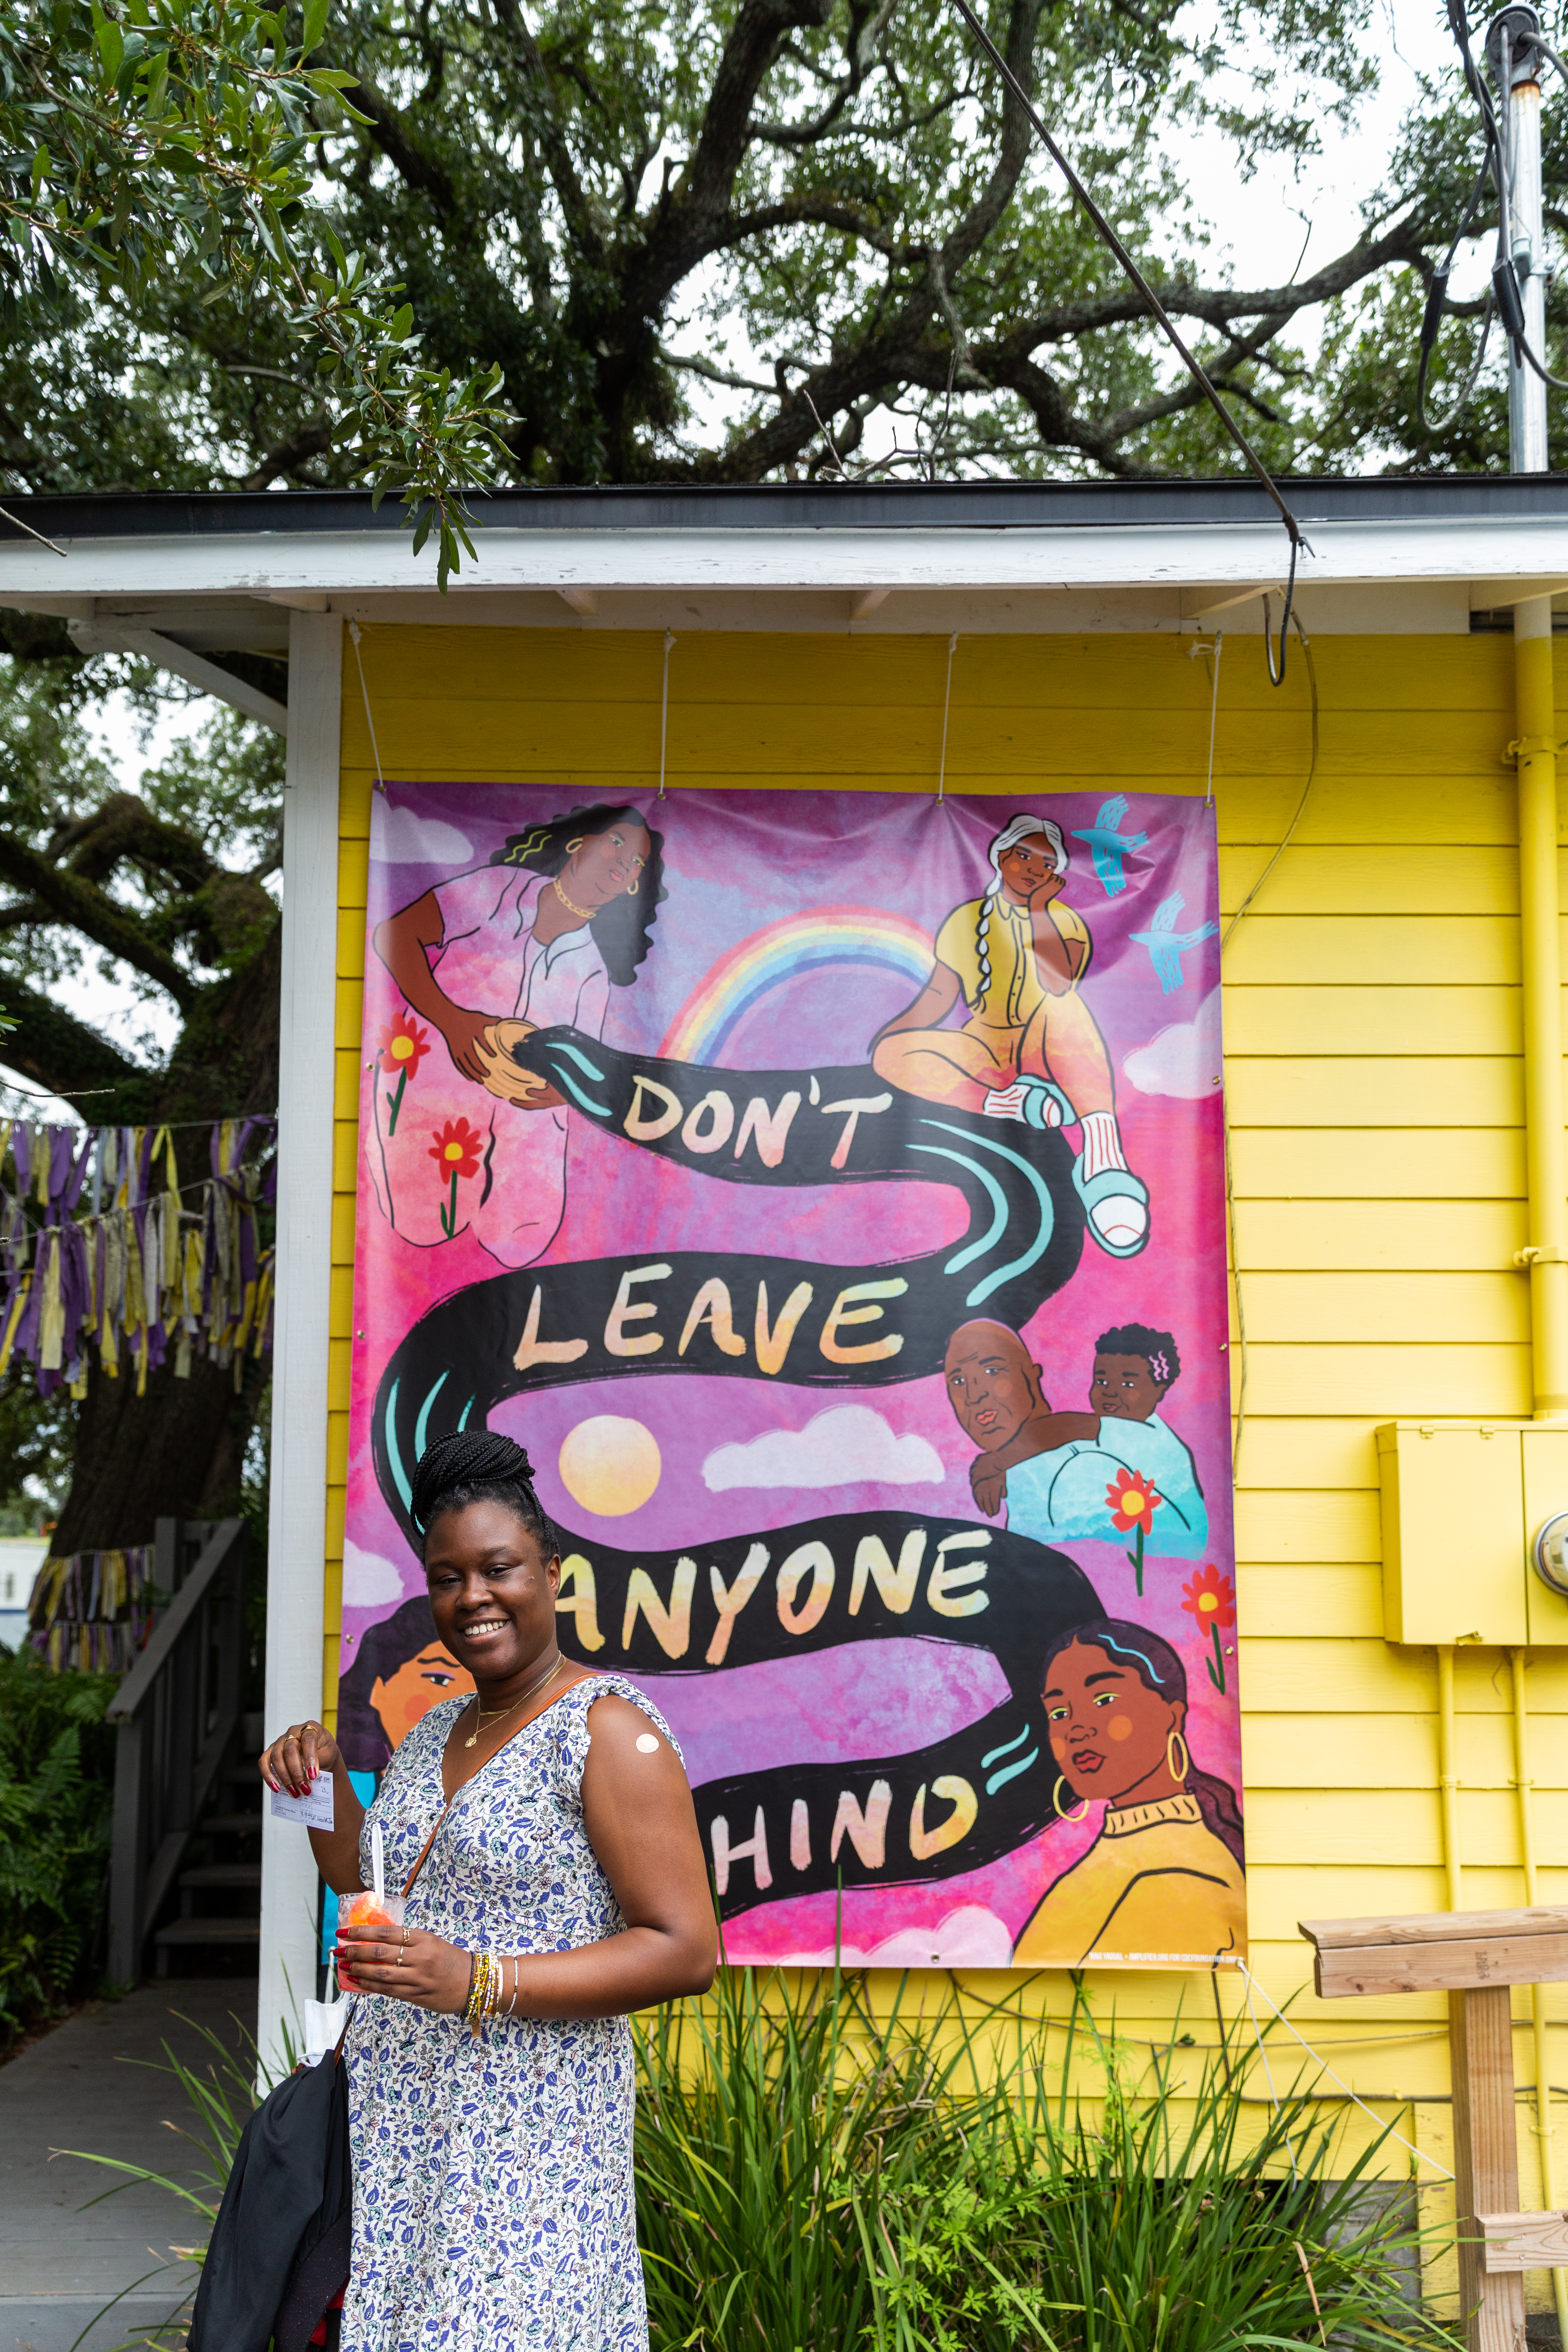 A Black woman smiles and holds up her COVID-19 vaccine card in front of a yellow building with a sign that reads "don't leave anyone behind."